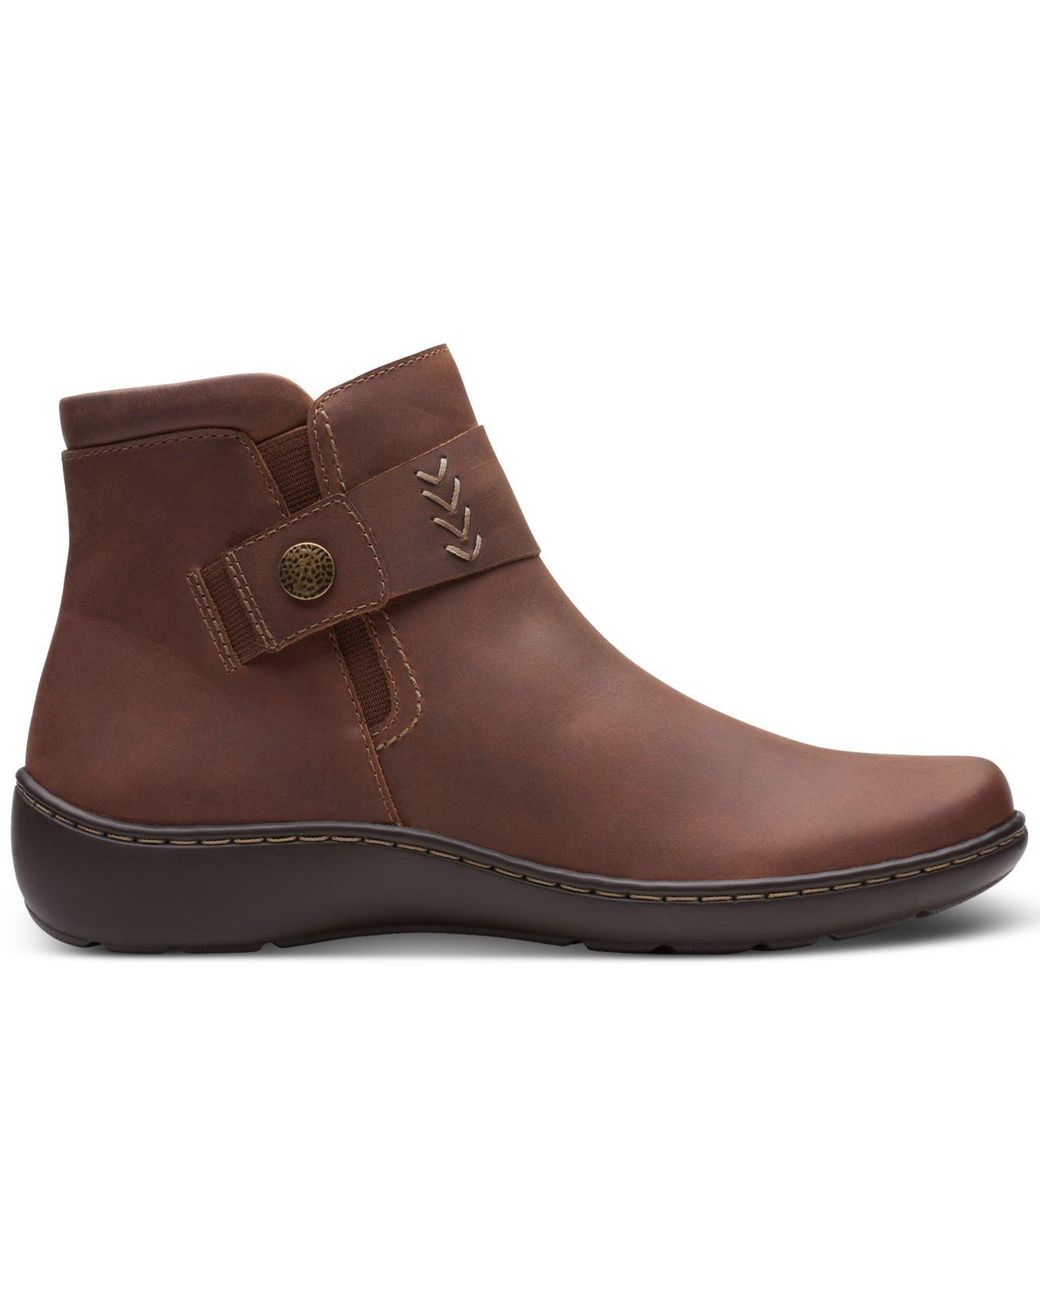 Clarks Cora Rae Button Strap Ankle Booties in Brown | Lyst